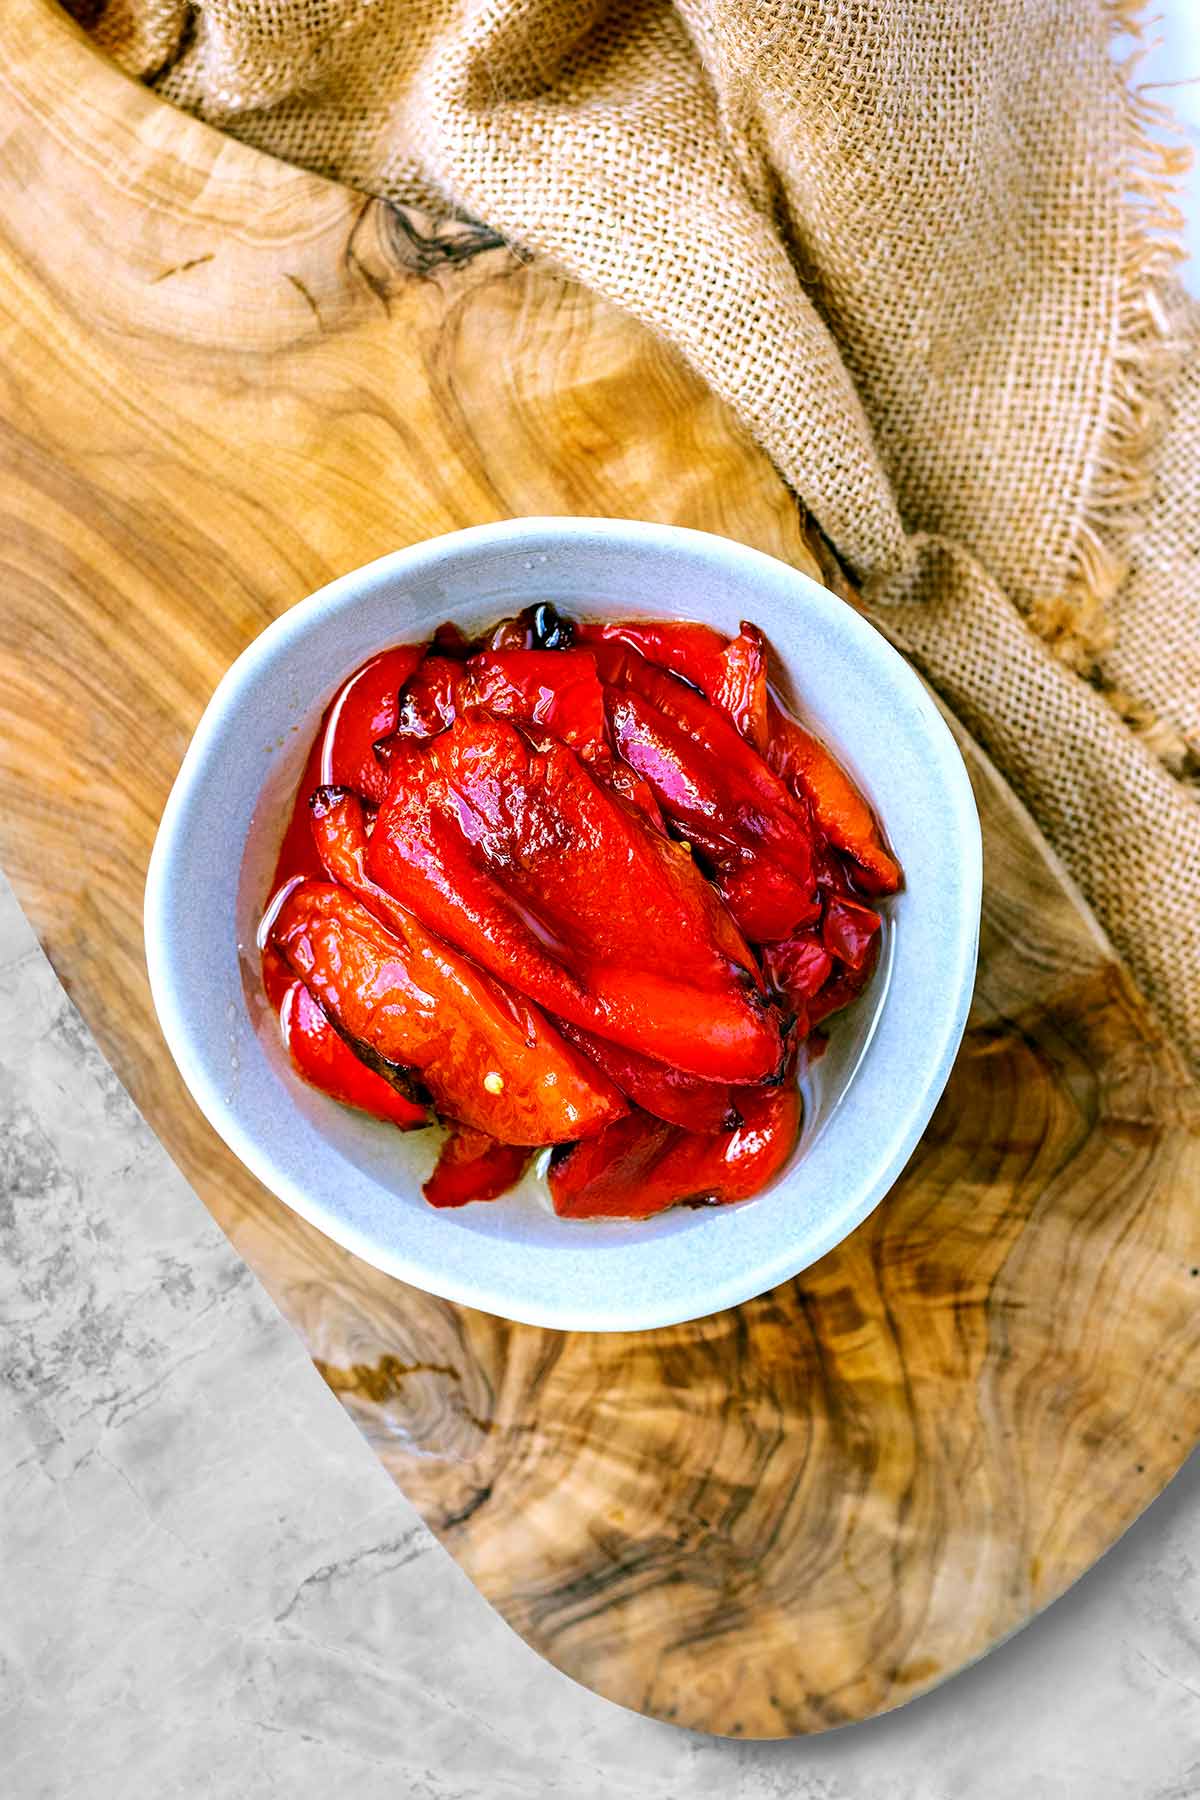 A bowl of roasted red peppers on a wooden serving board.